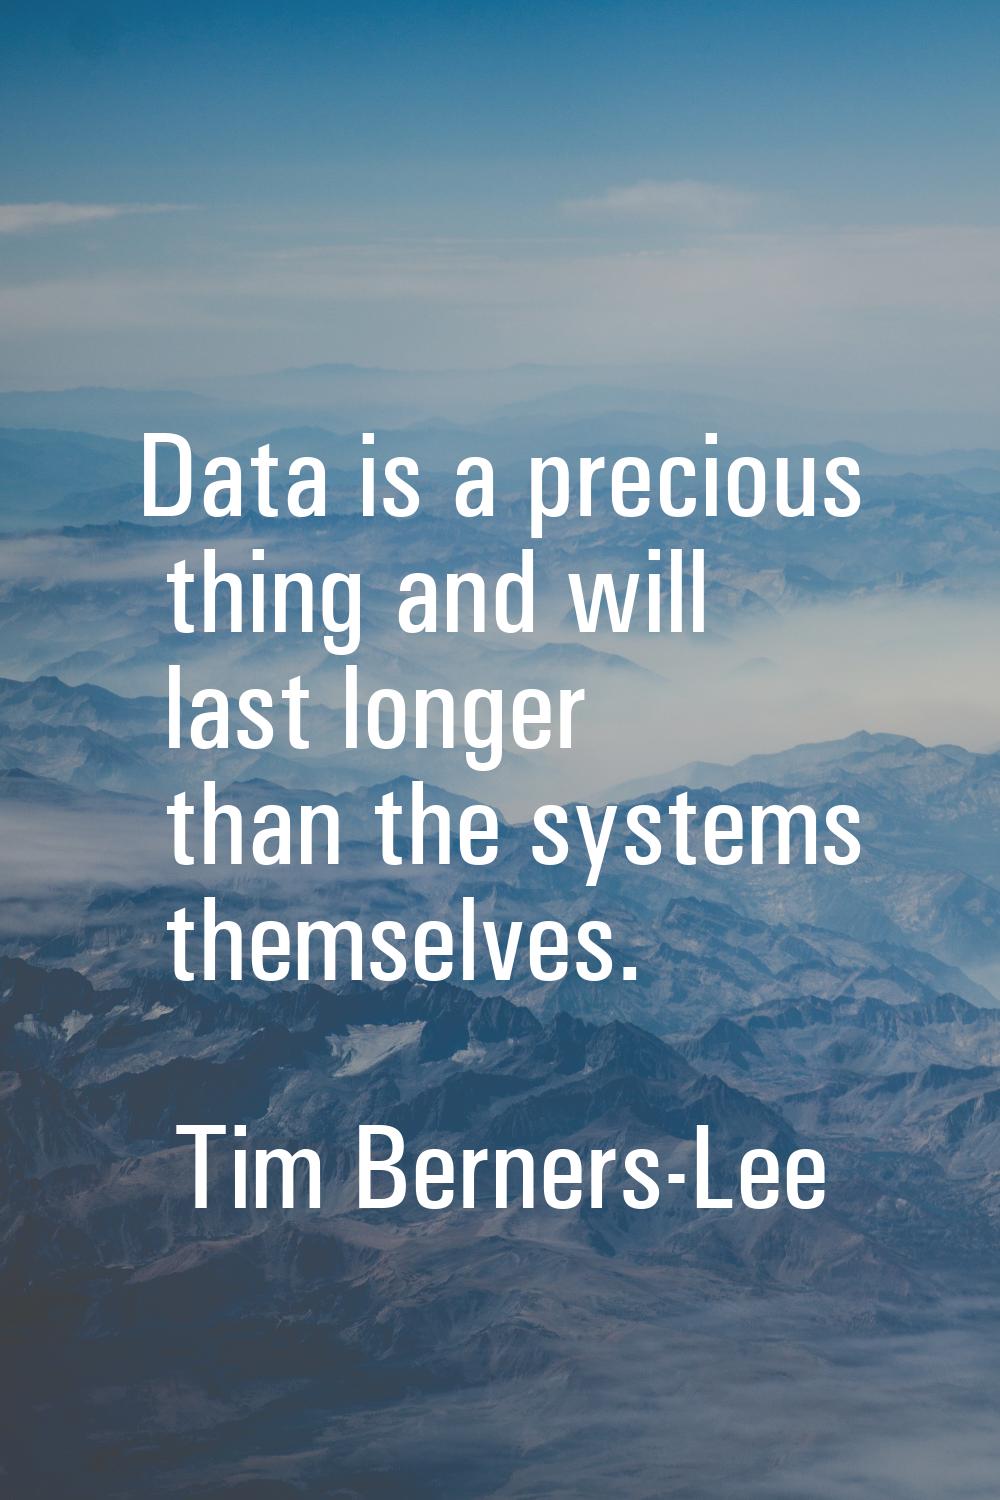 Data is a precious thing and will last longer than the systems themselves.